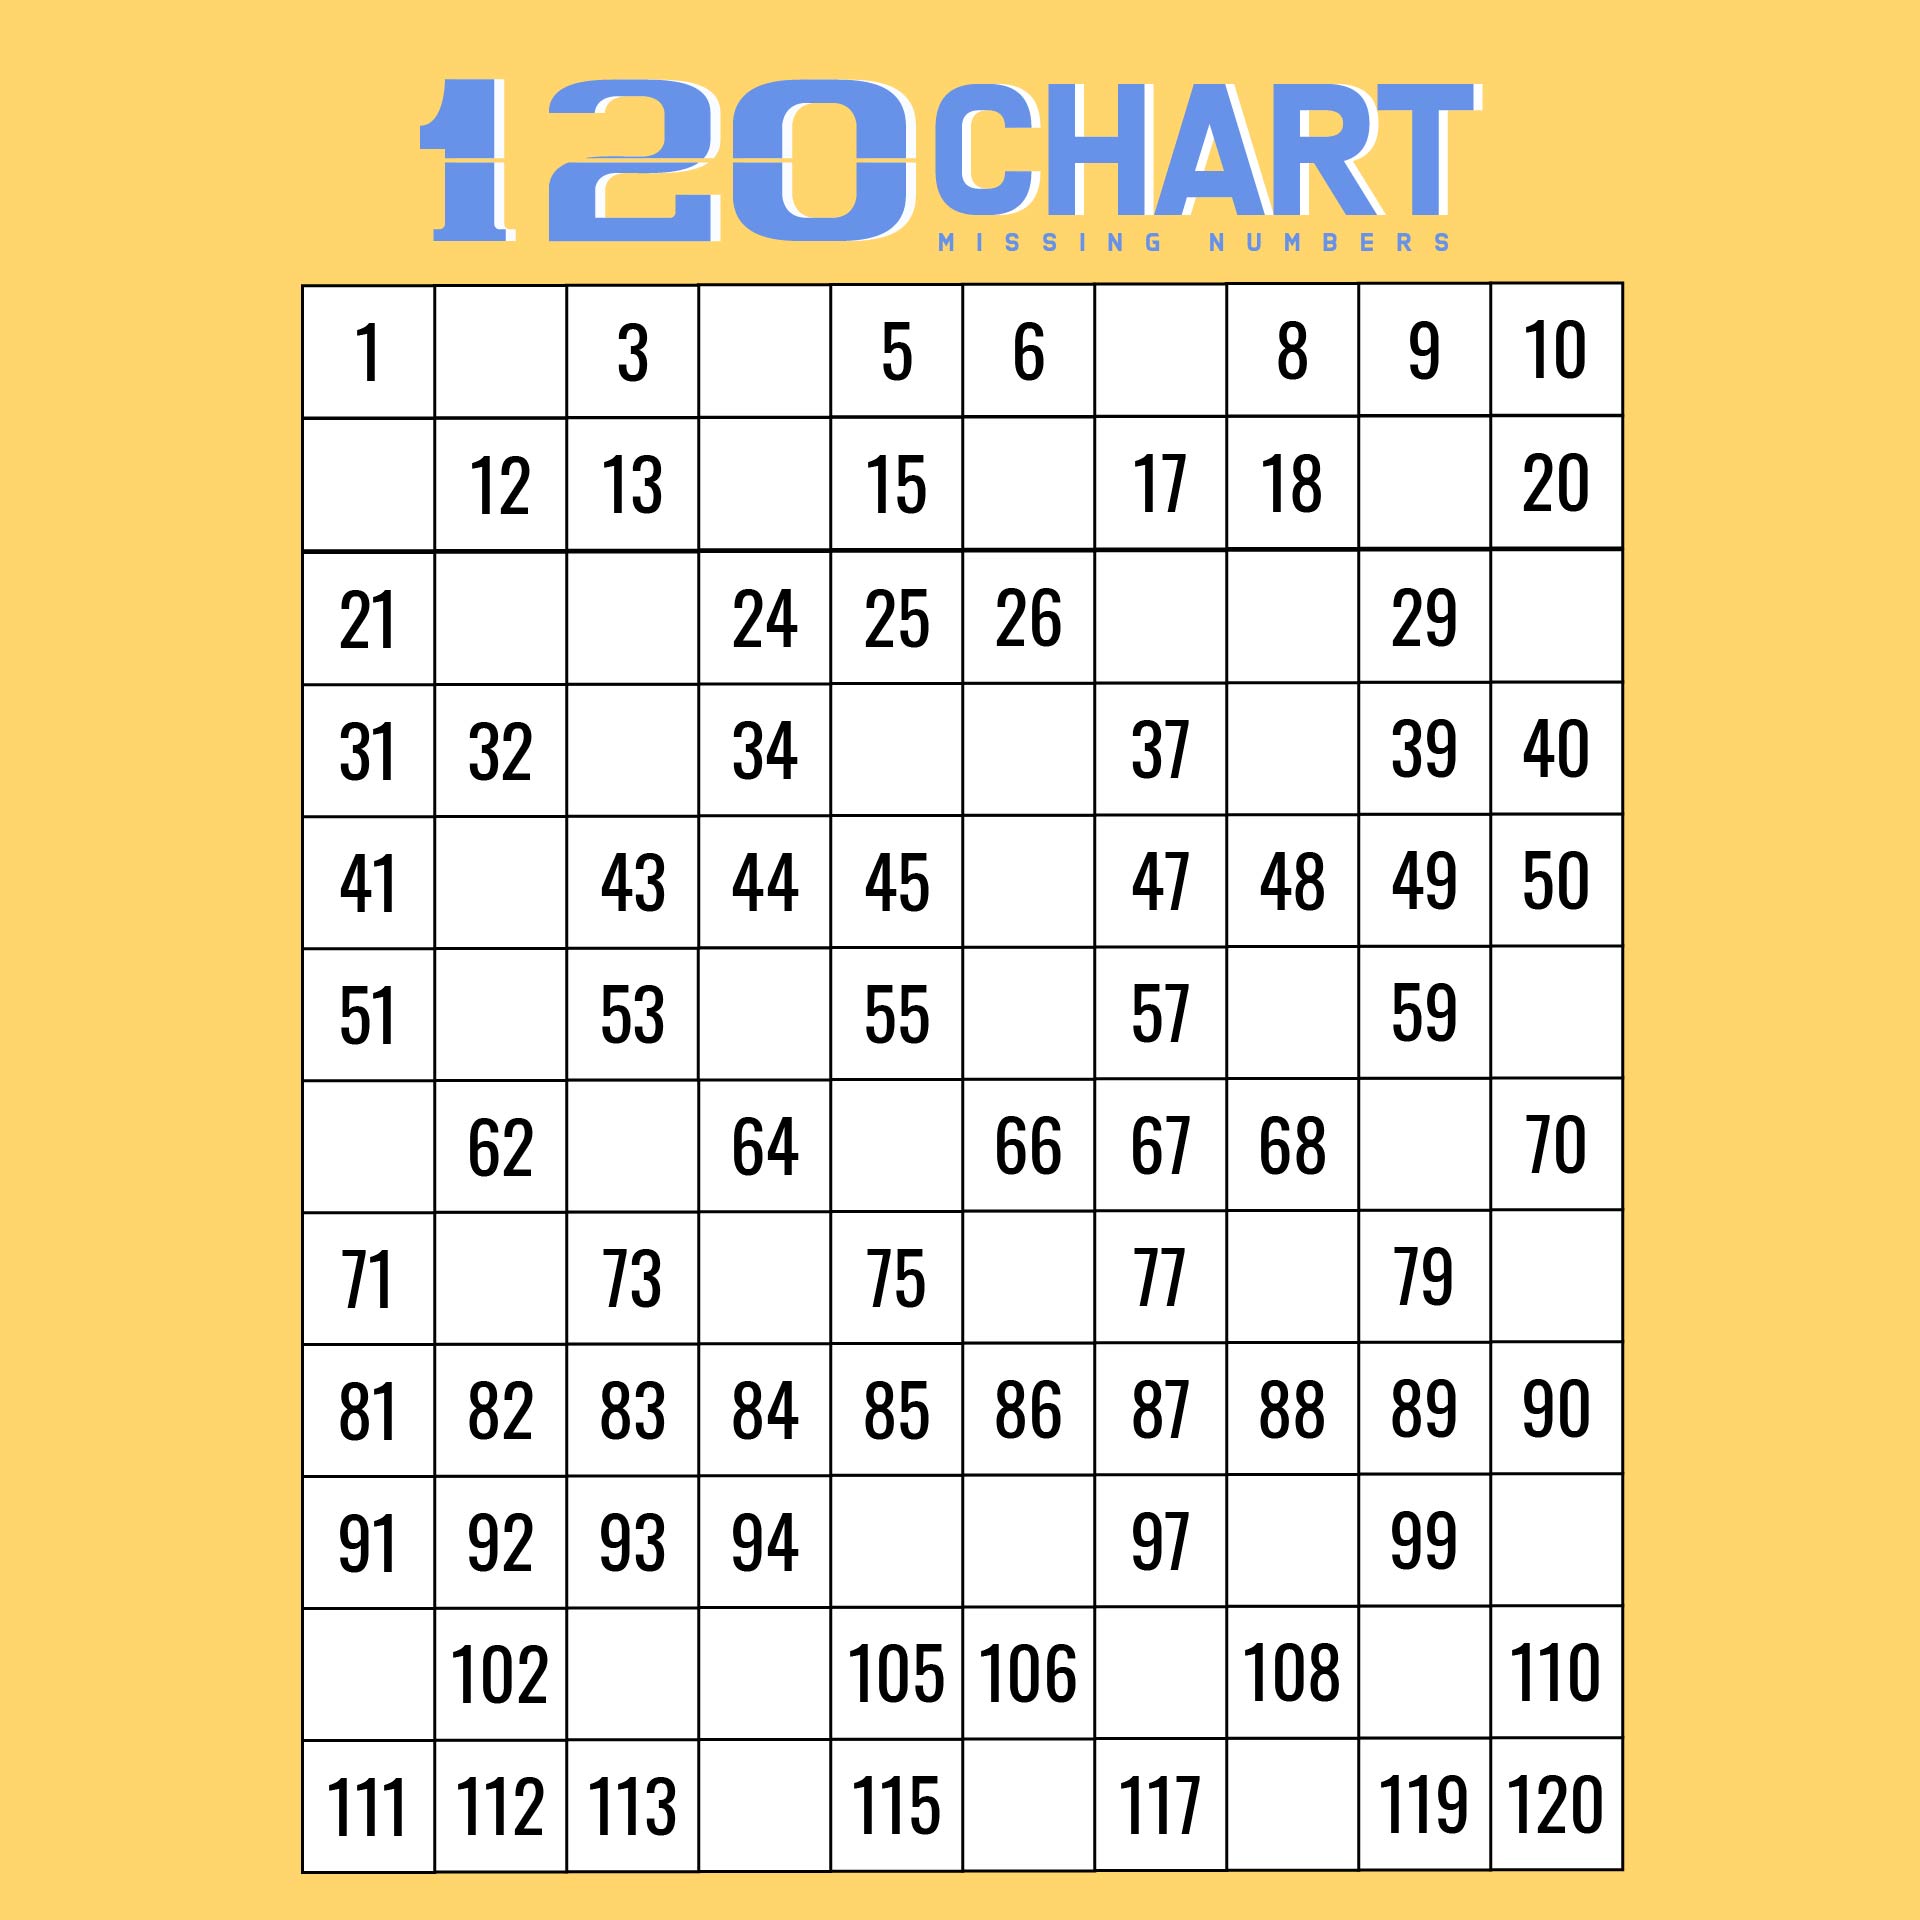 120 Chart Missing Numbers Printable